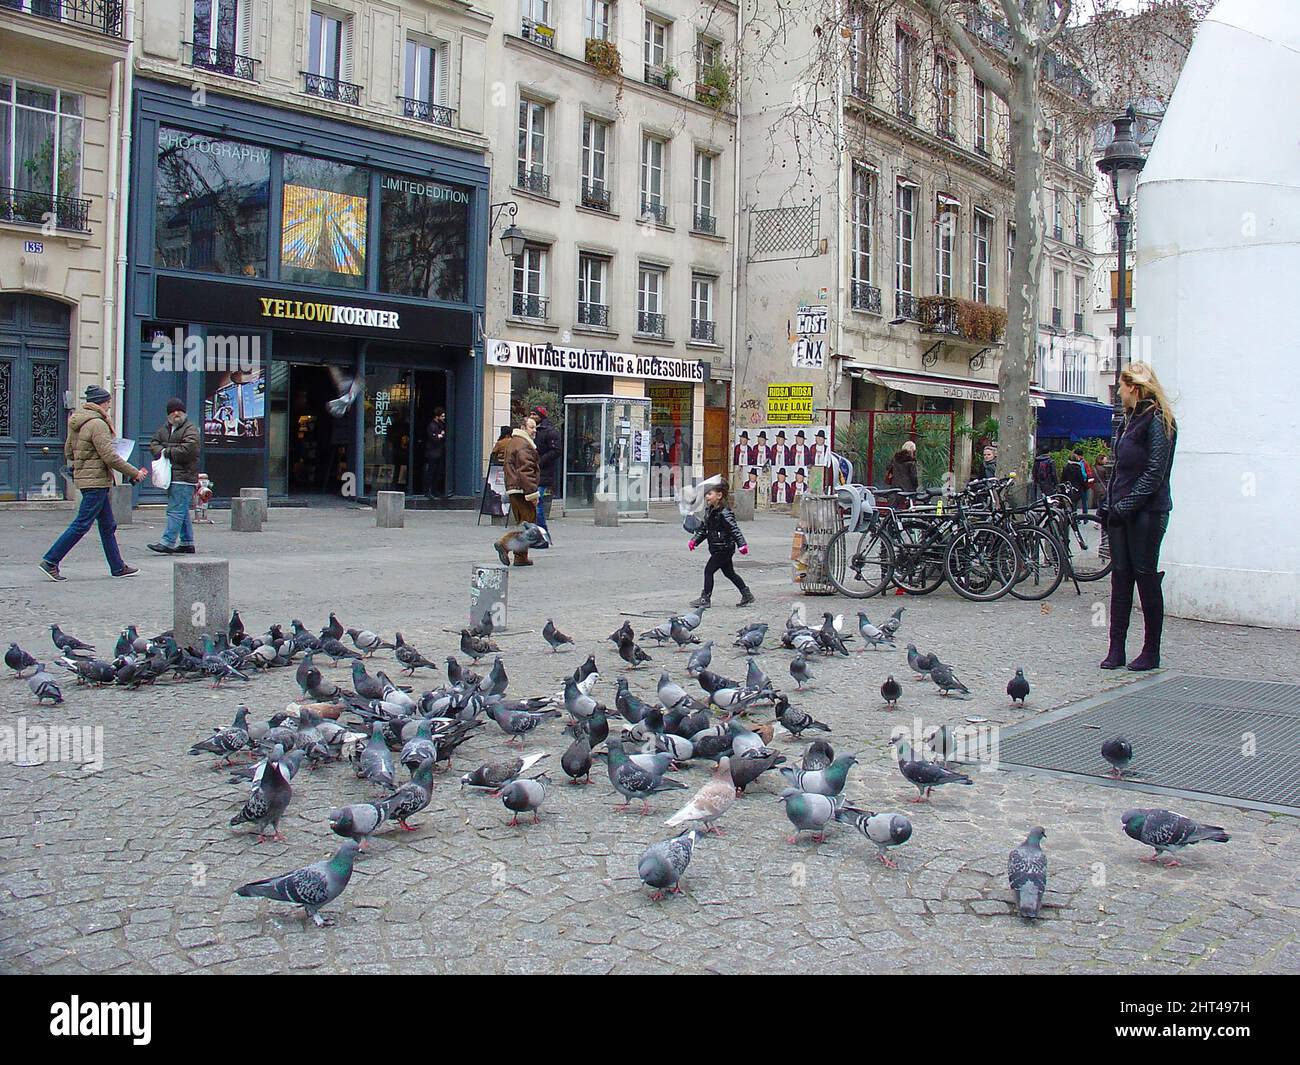 Pigeons in the streets of Paris, kid running through pigeons. Vintage clothing amd accessories store vitrine in Paris. City pigeons. Stock Photo